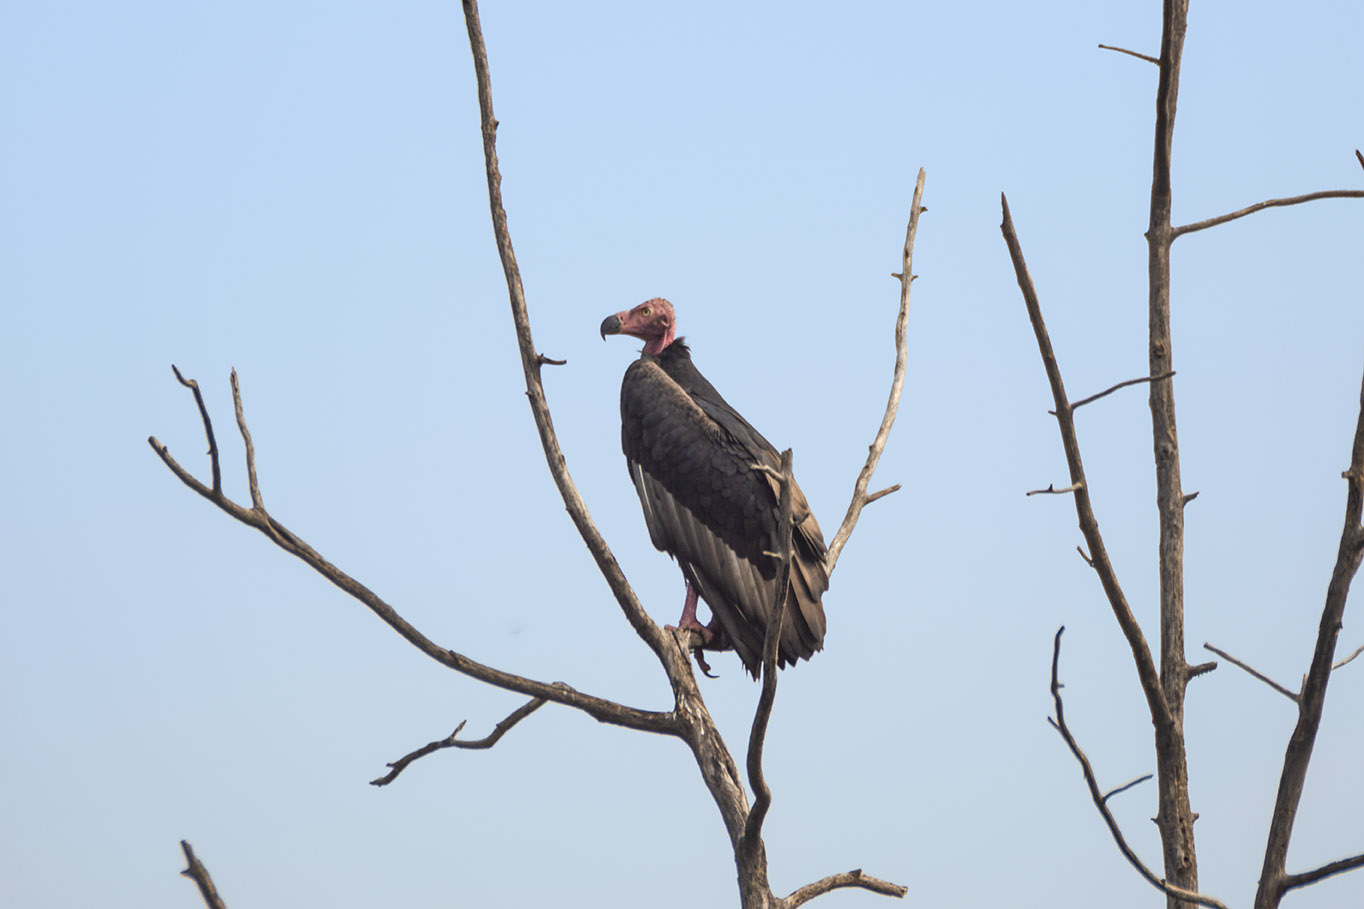 The Indian Vulture in the park